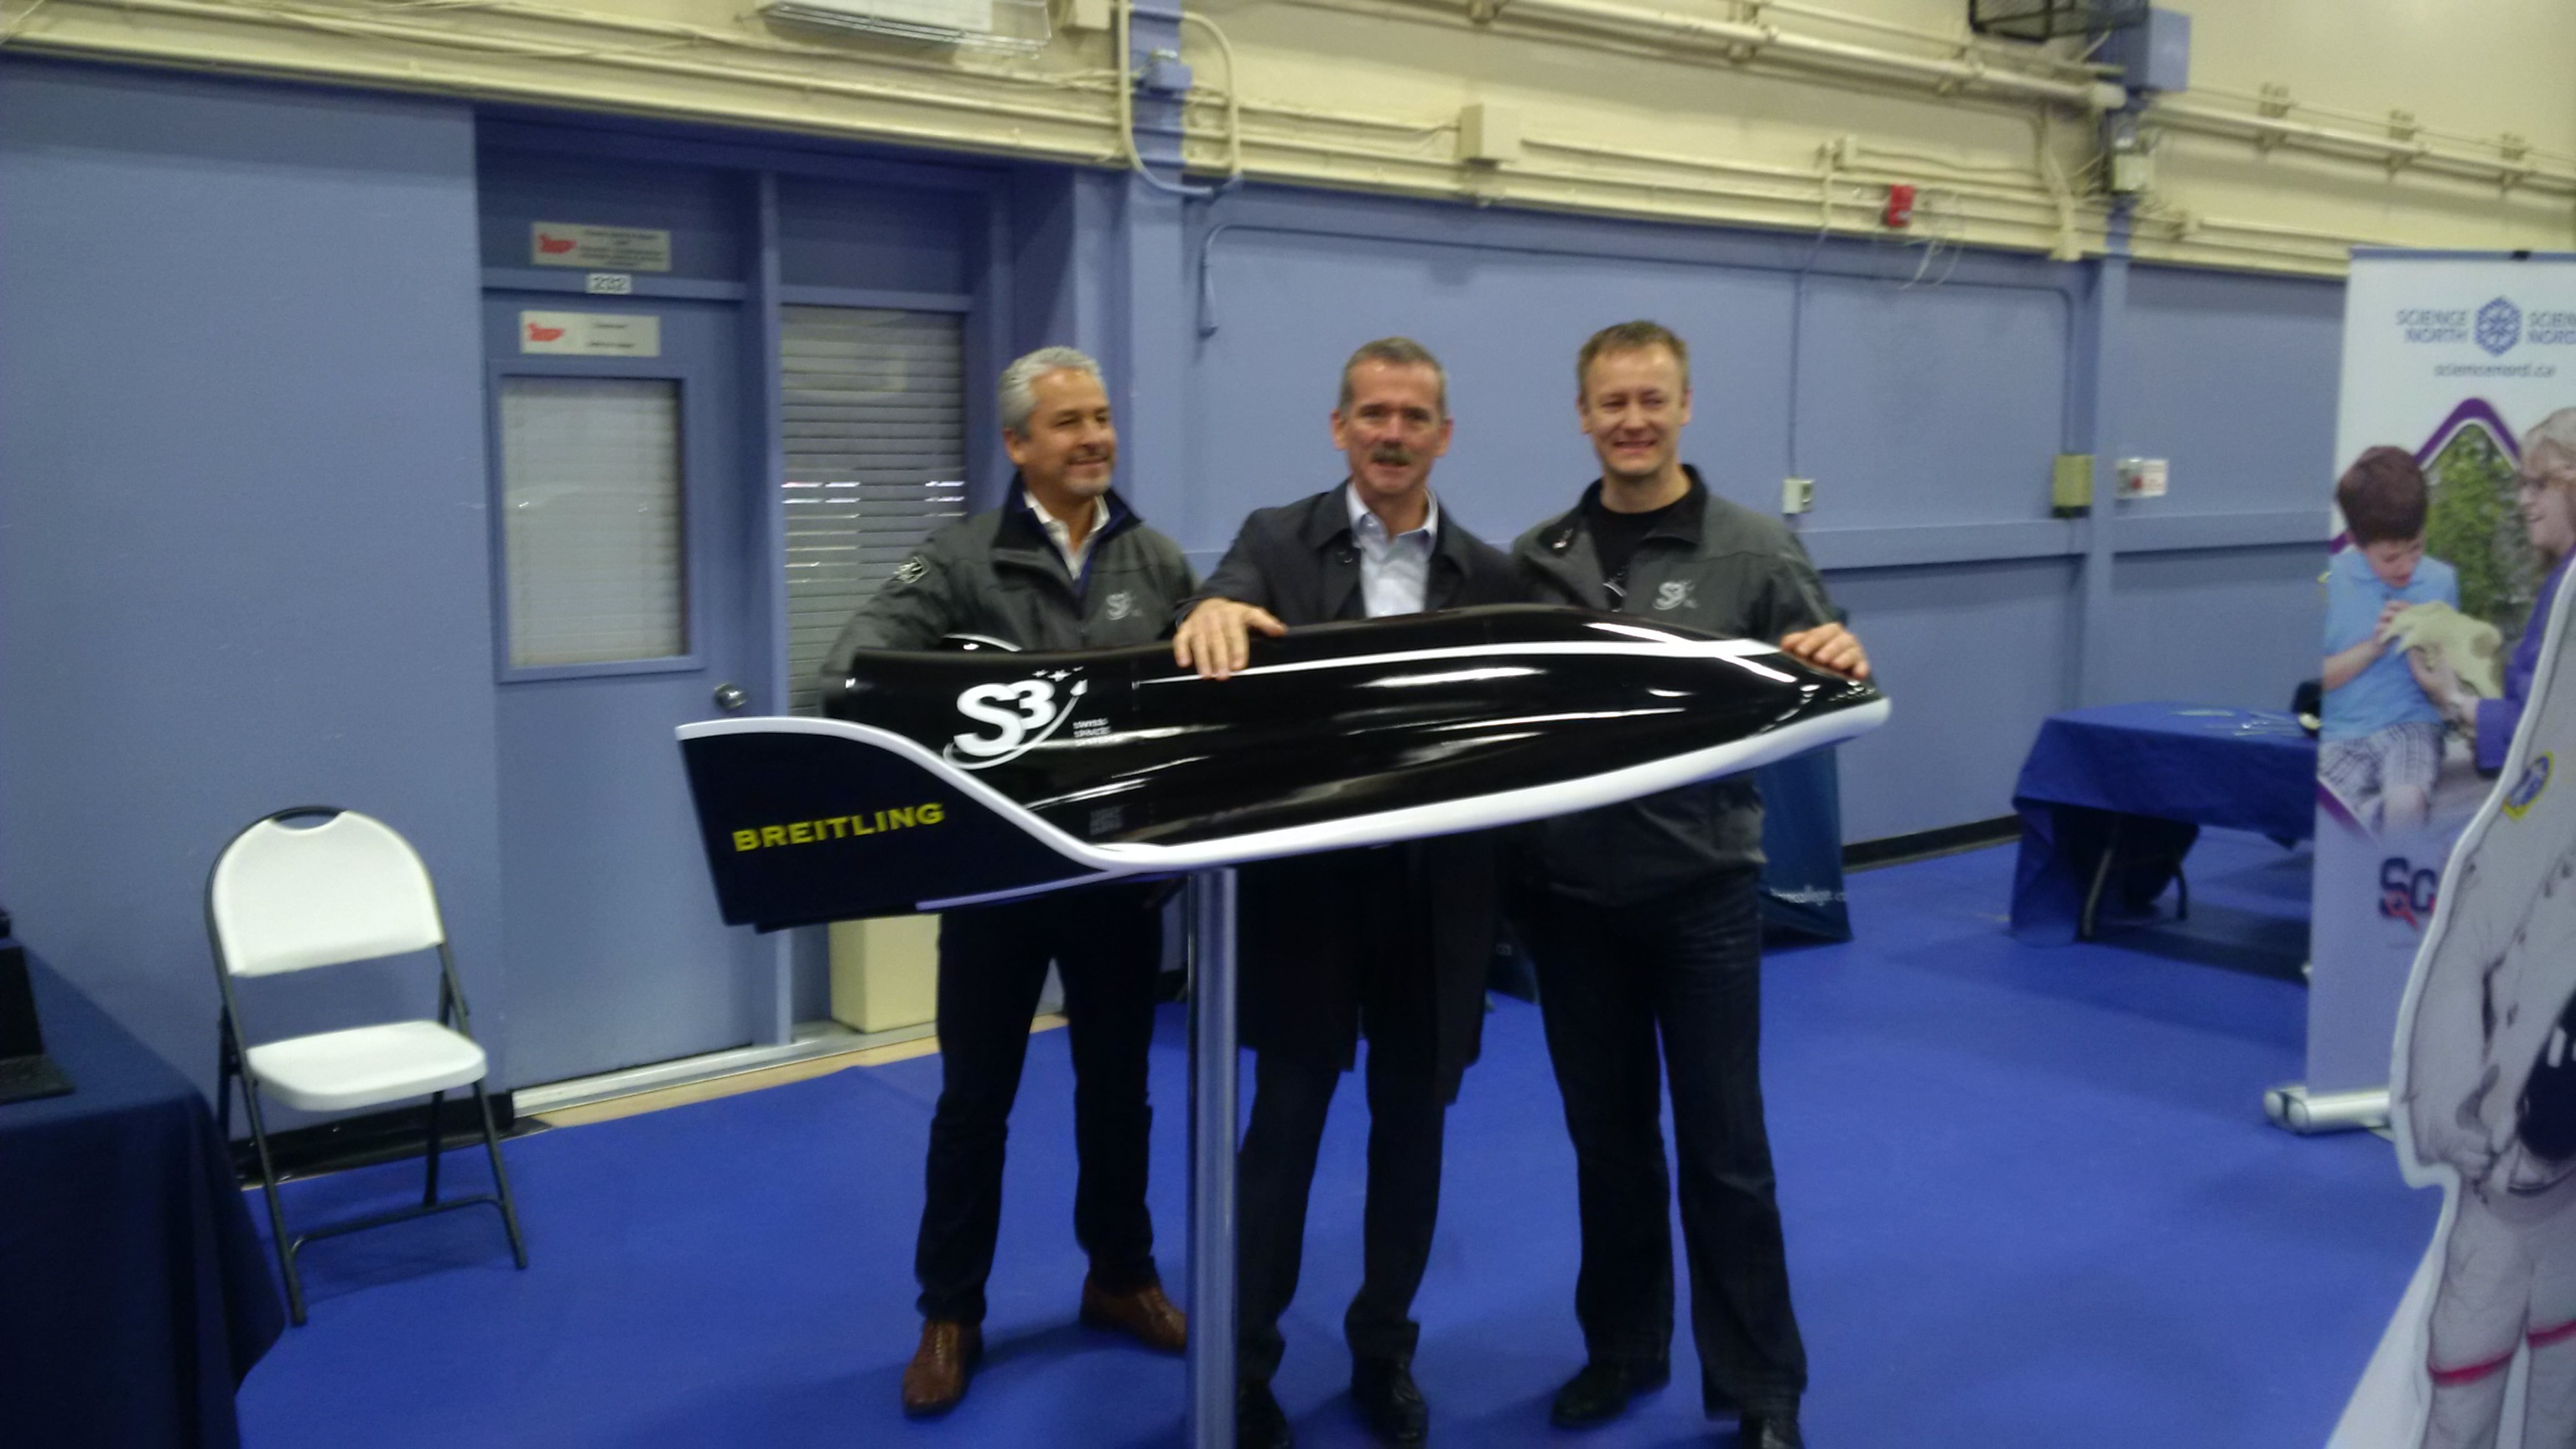 Robert Feierbach and Rolf Brant from Swiss Space Systems with Col. Chris Hadfield and their SOAR shuttle model